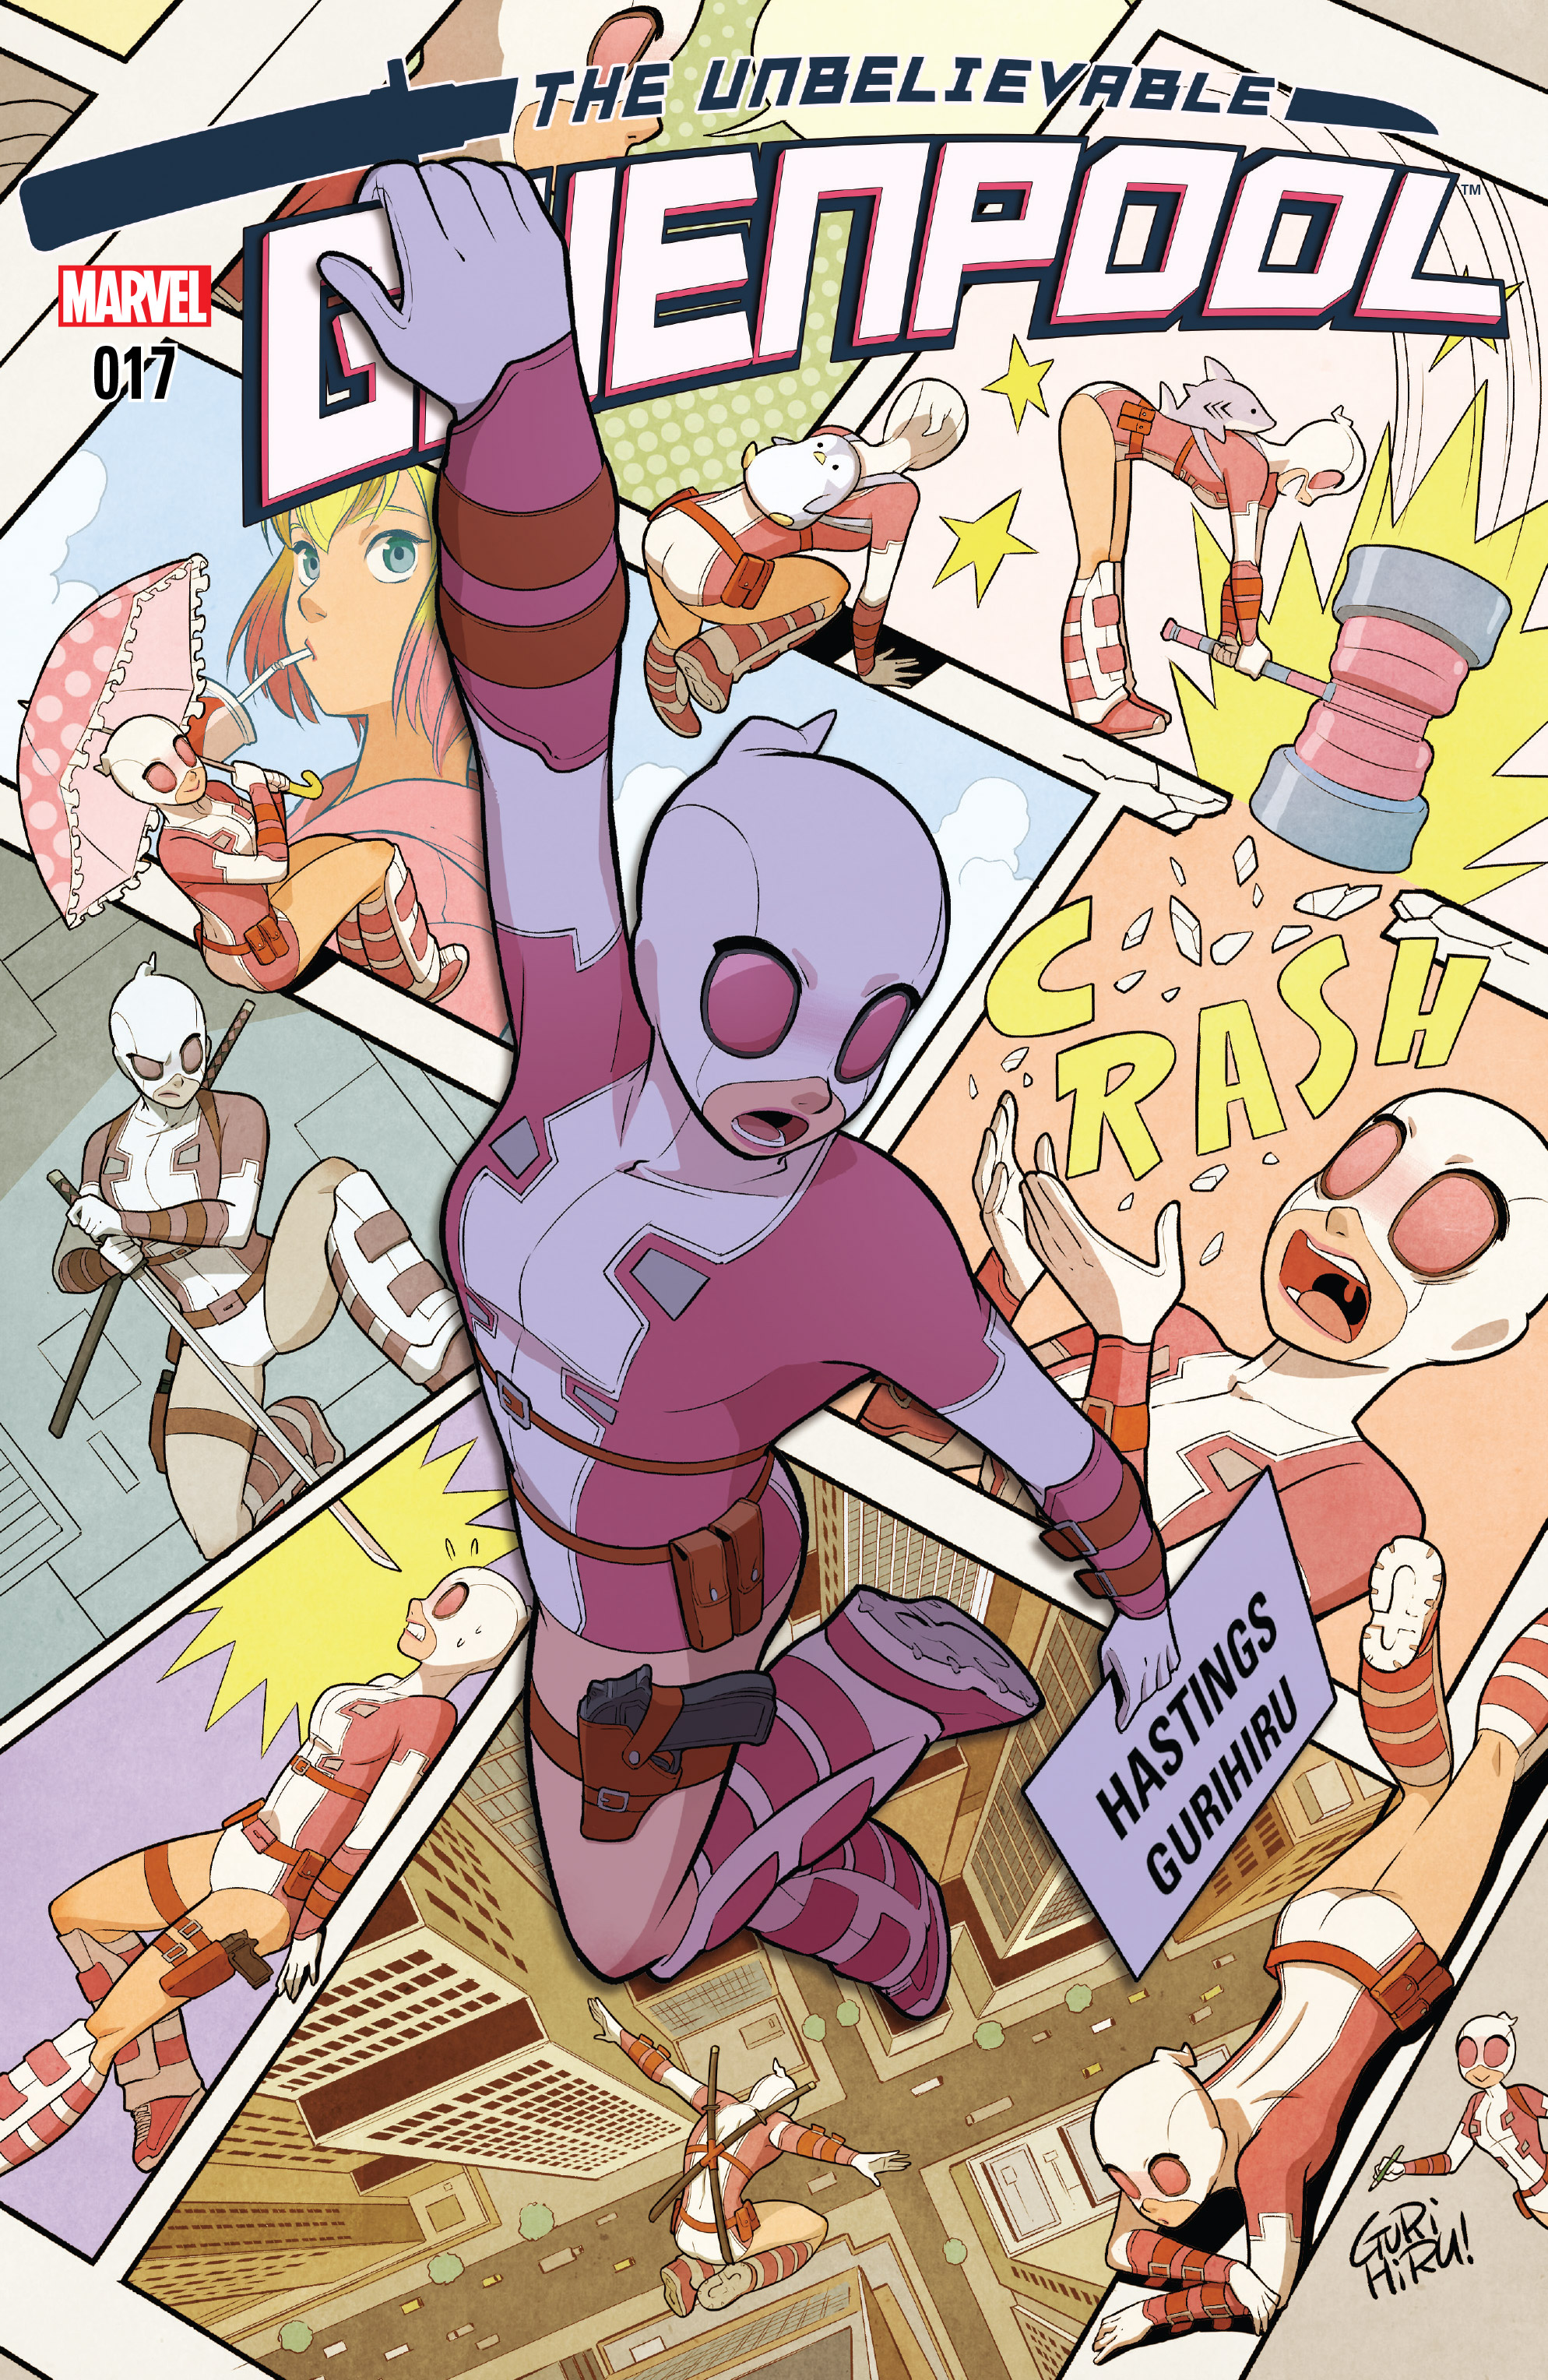 The Unbelievable Gwenpool Issue 17 | Read The Unbelievable Gwenpool Issue  17 comic online in high quality. Read Full Comic online for free - Read  comics online in high quality .|viewcomiconline.com